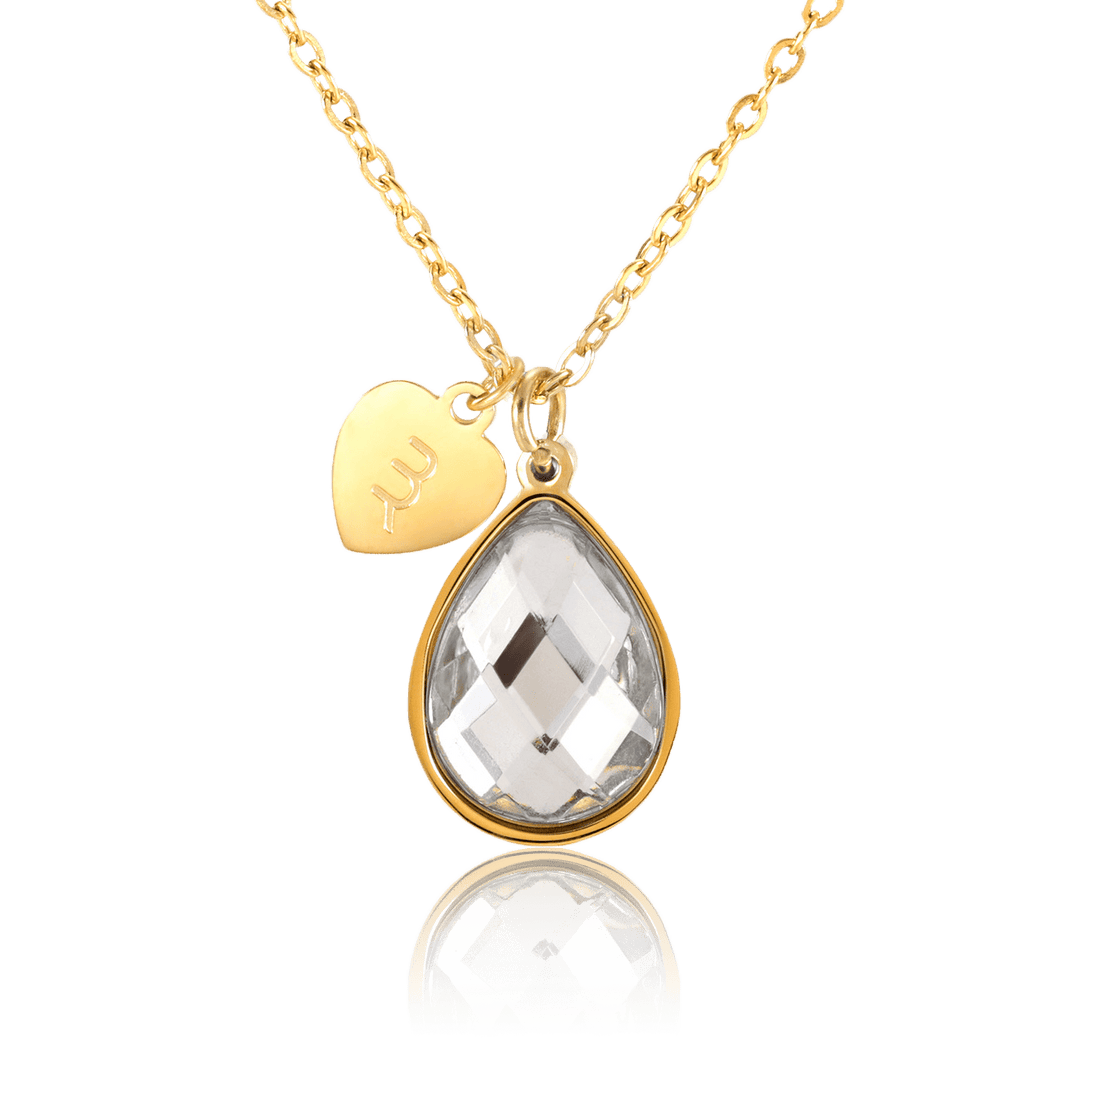 bianco rosso Necklaces Gold April Birthstone - Diamond cyprus greece jewelry gift free shipping europe worldwide